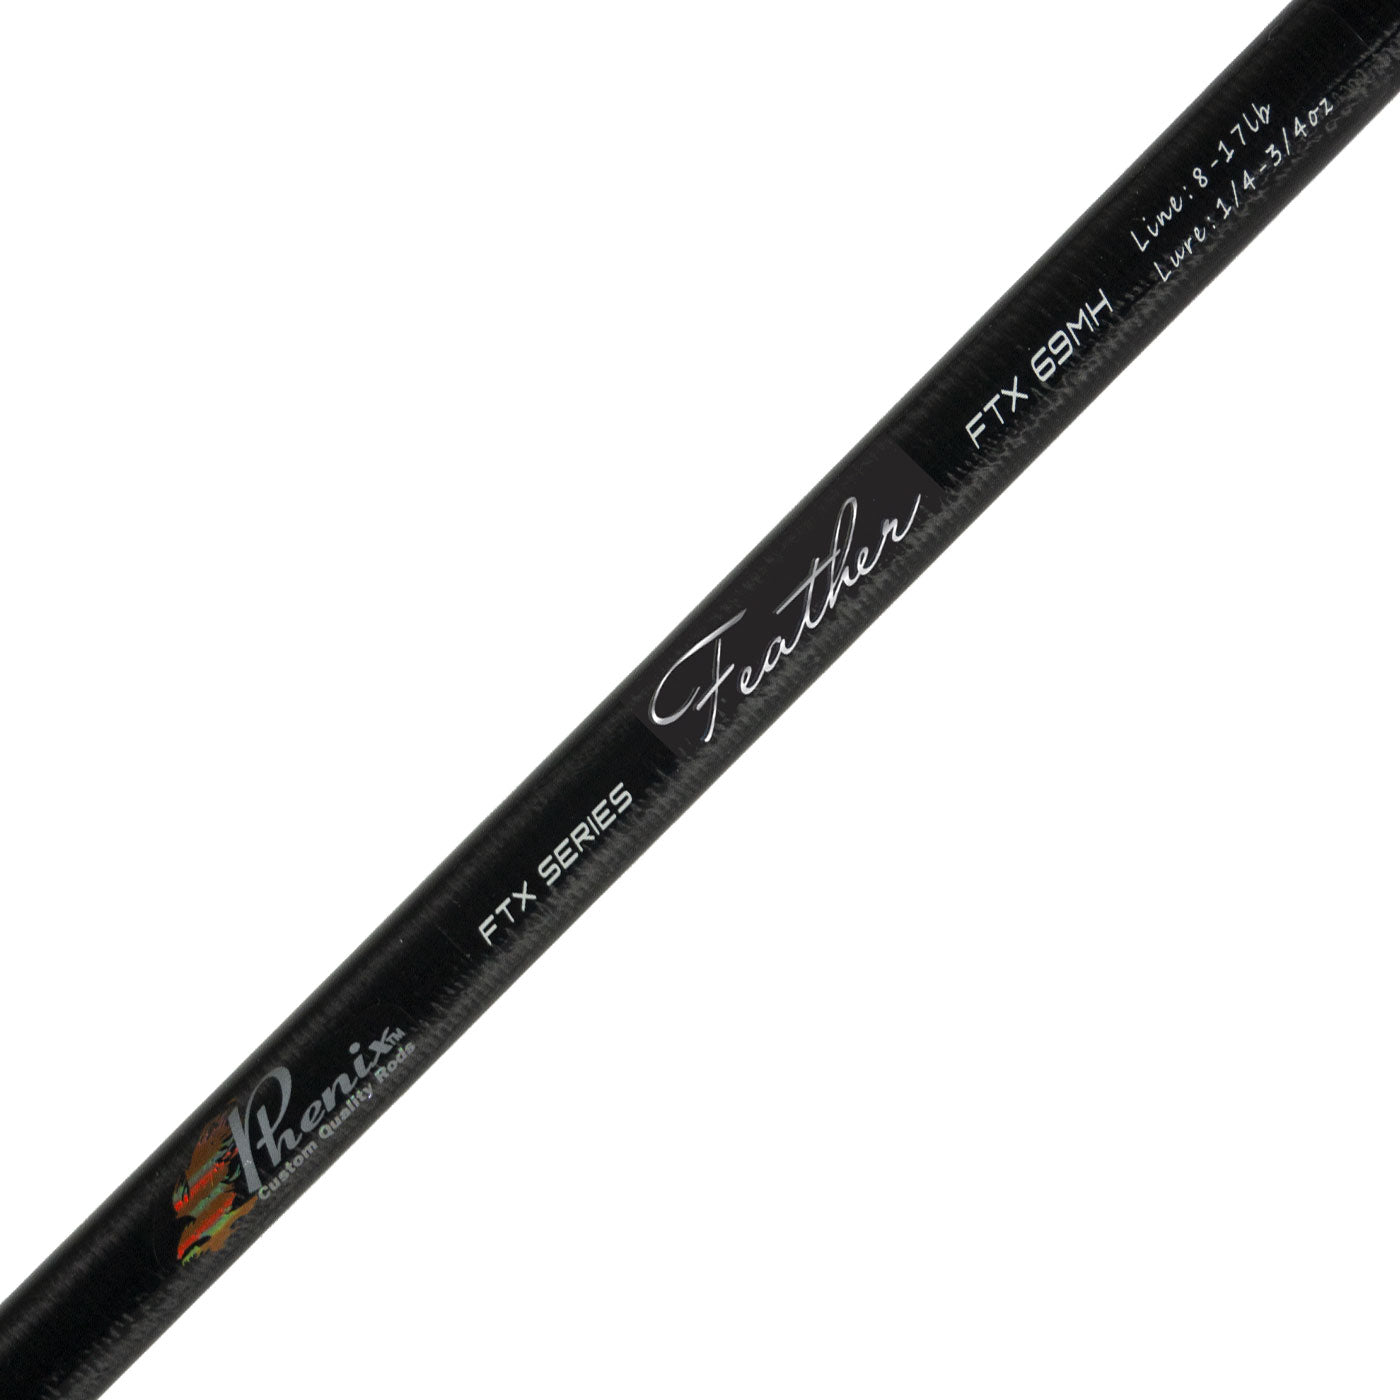 Feather Freshwater Casting Rod Blank FTX-C 71H